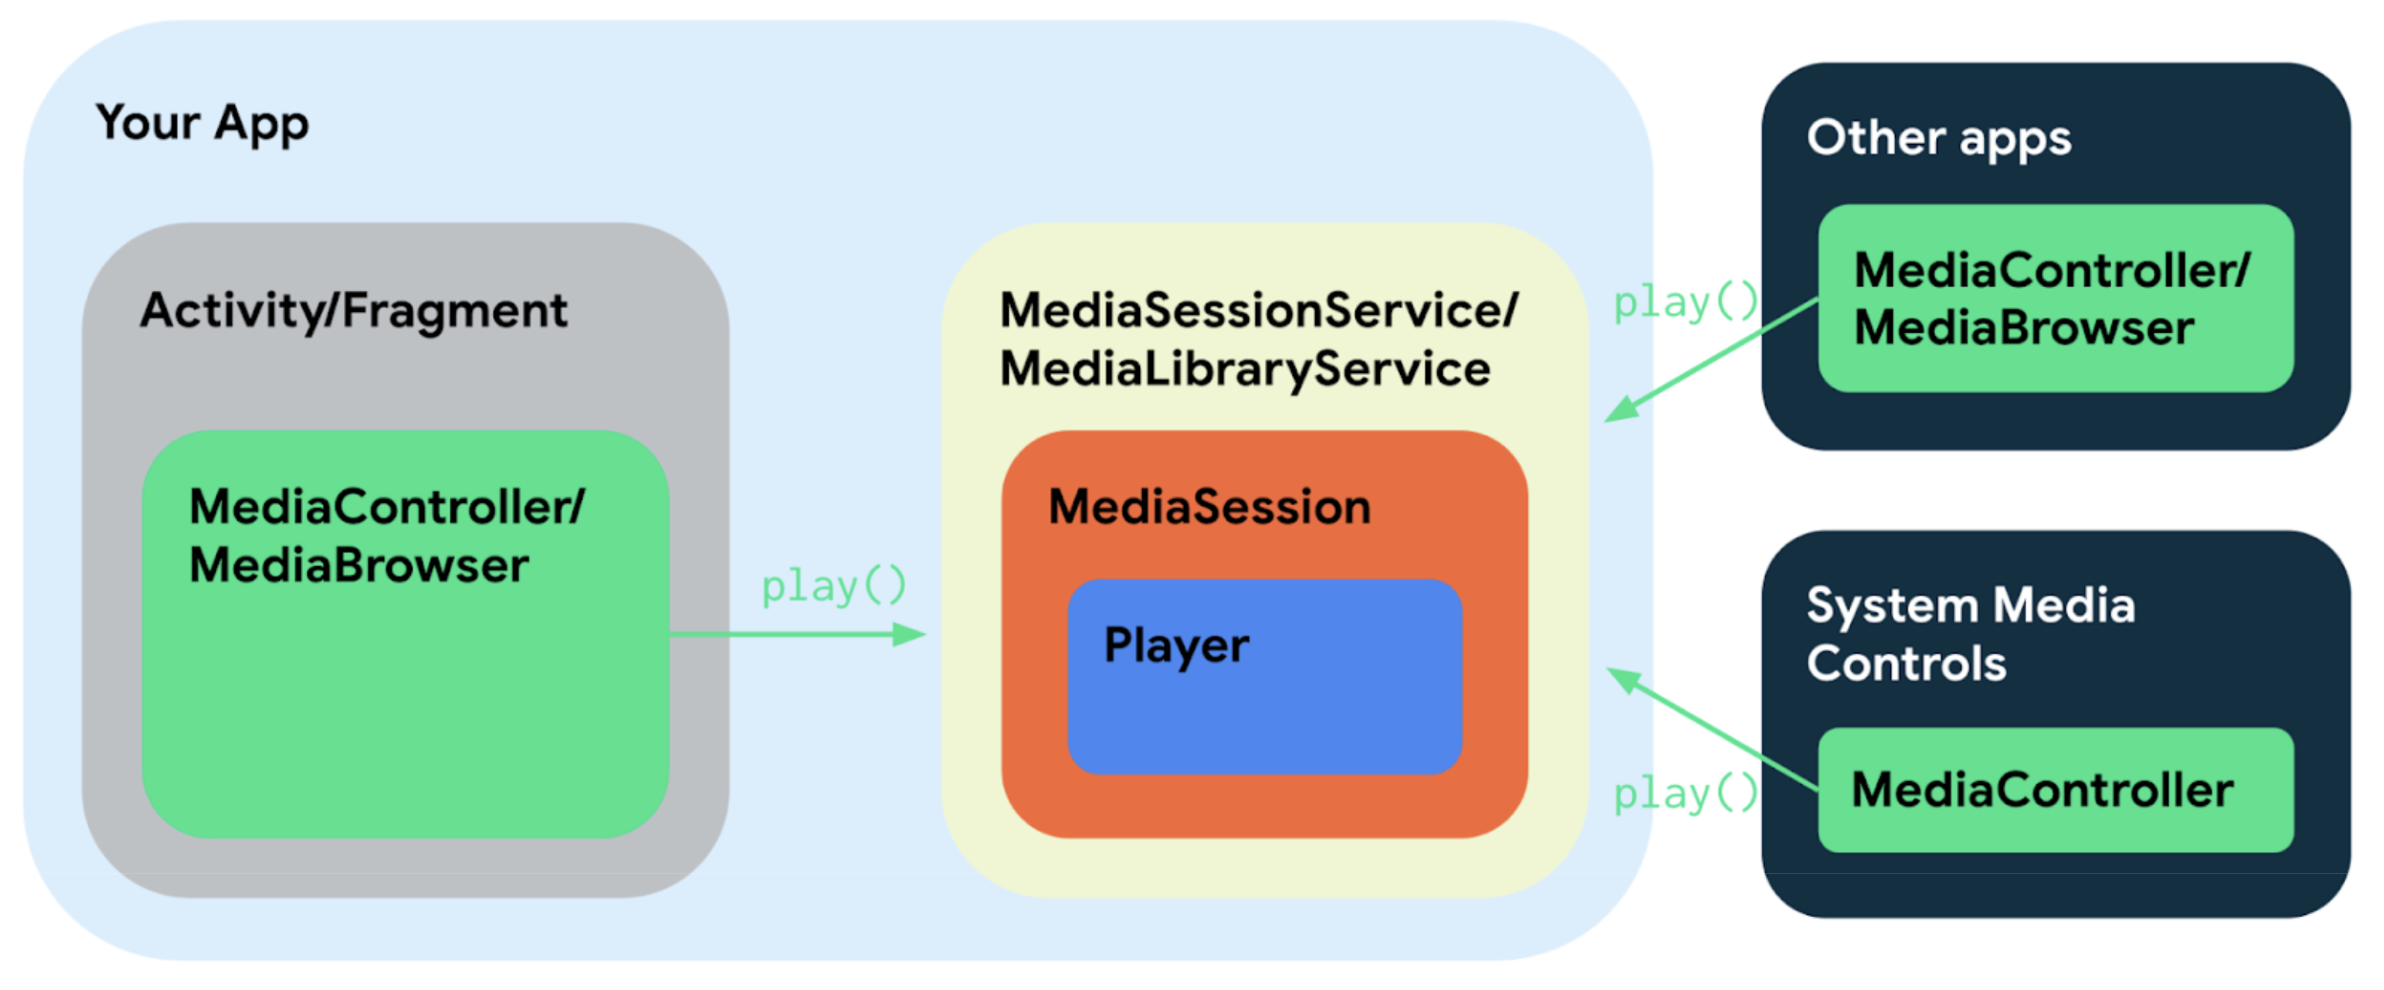 The different components of a media app that uses Media3 connect
  together in several simple ways owing to their sharing of interfaces
   and classes.